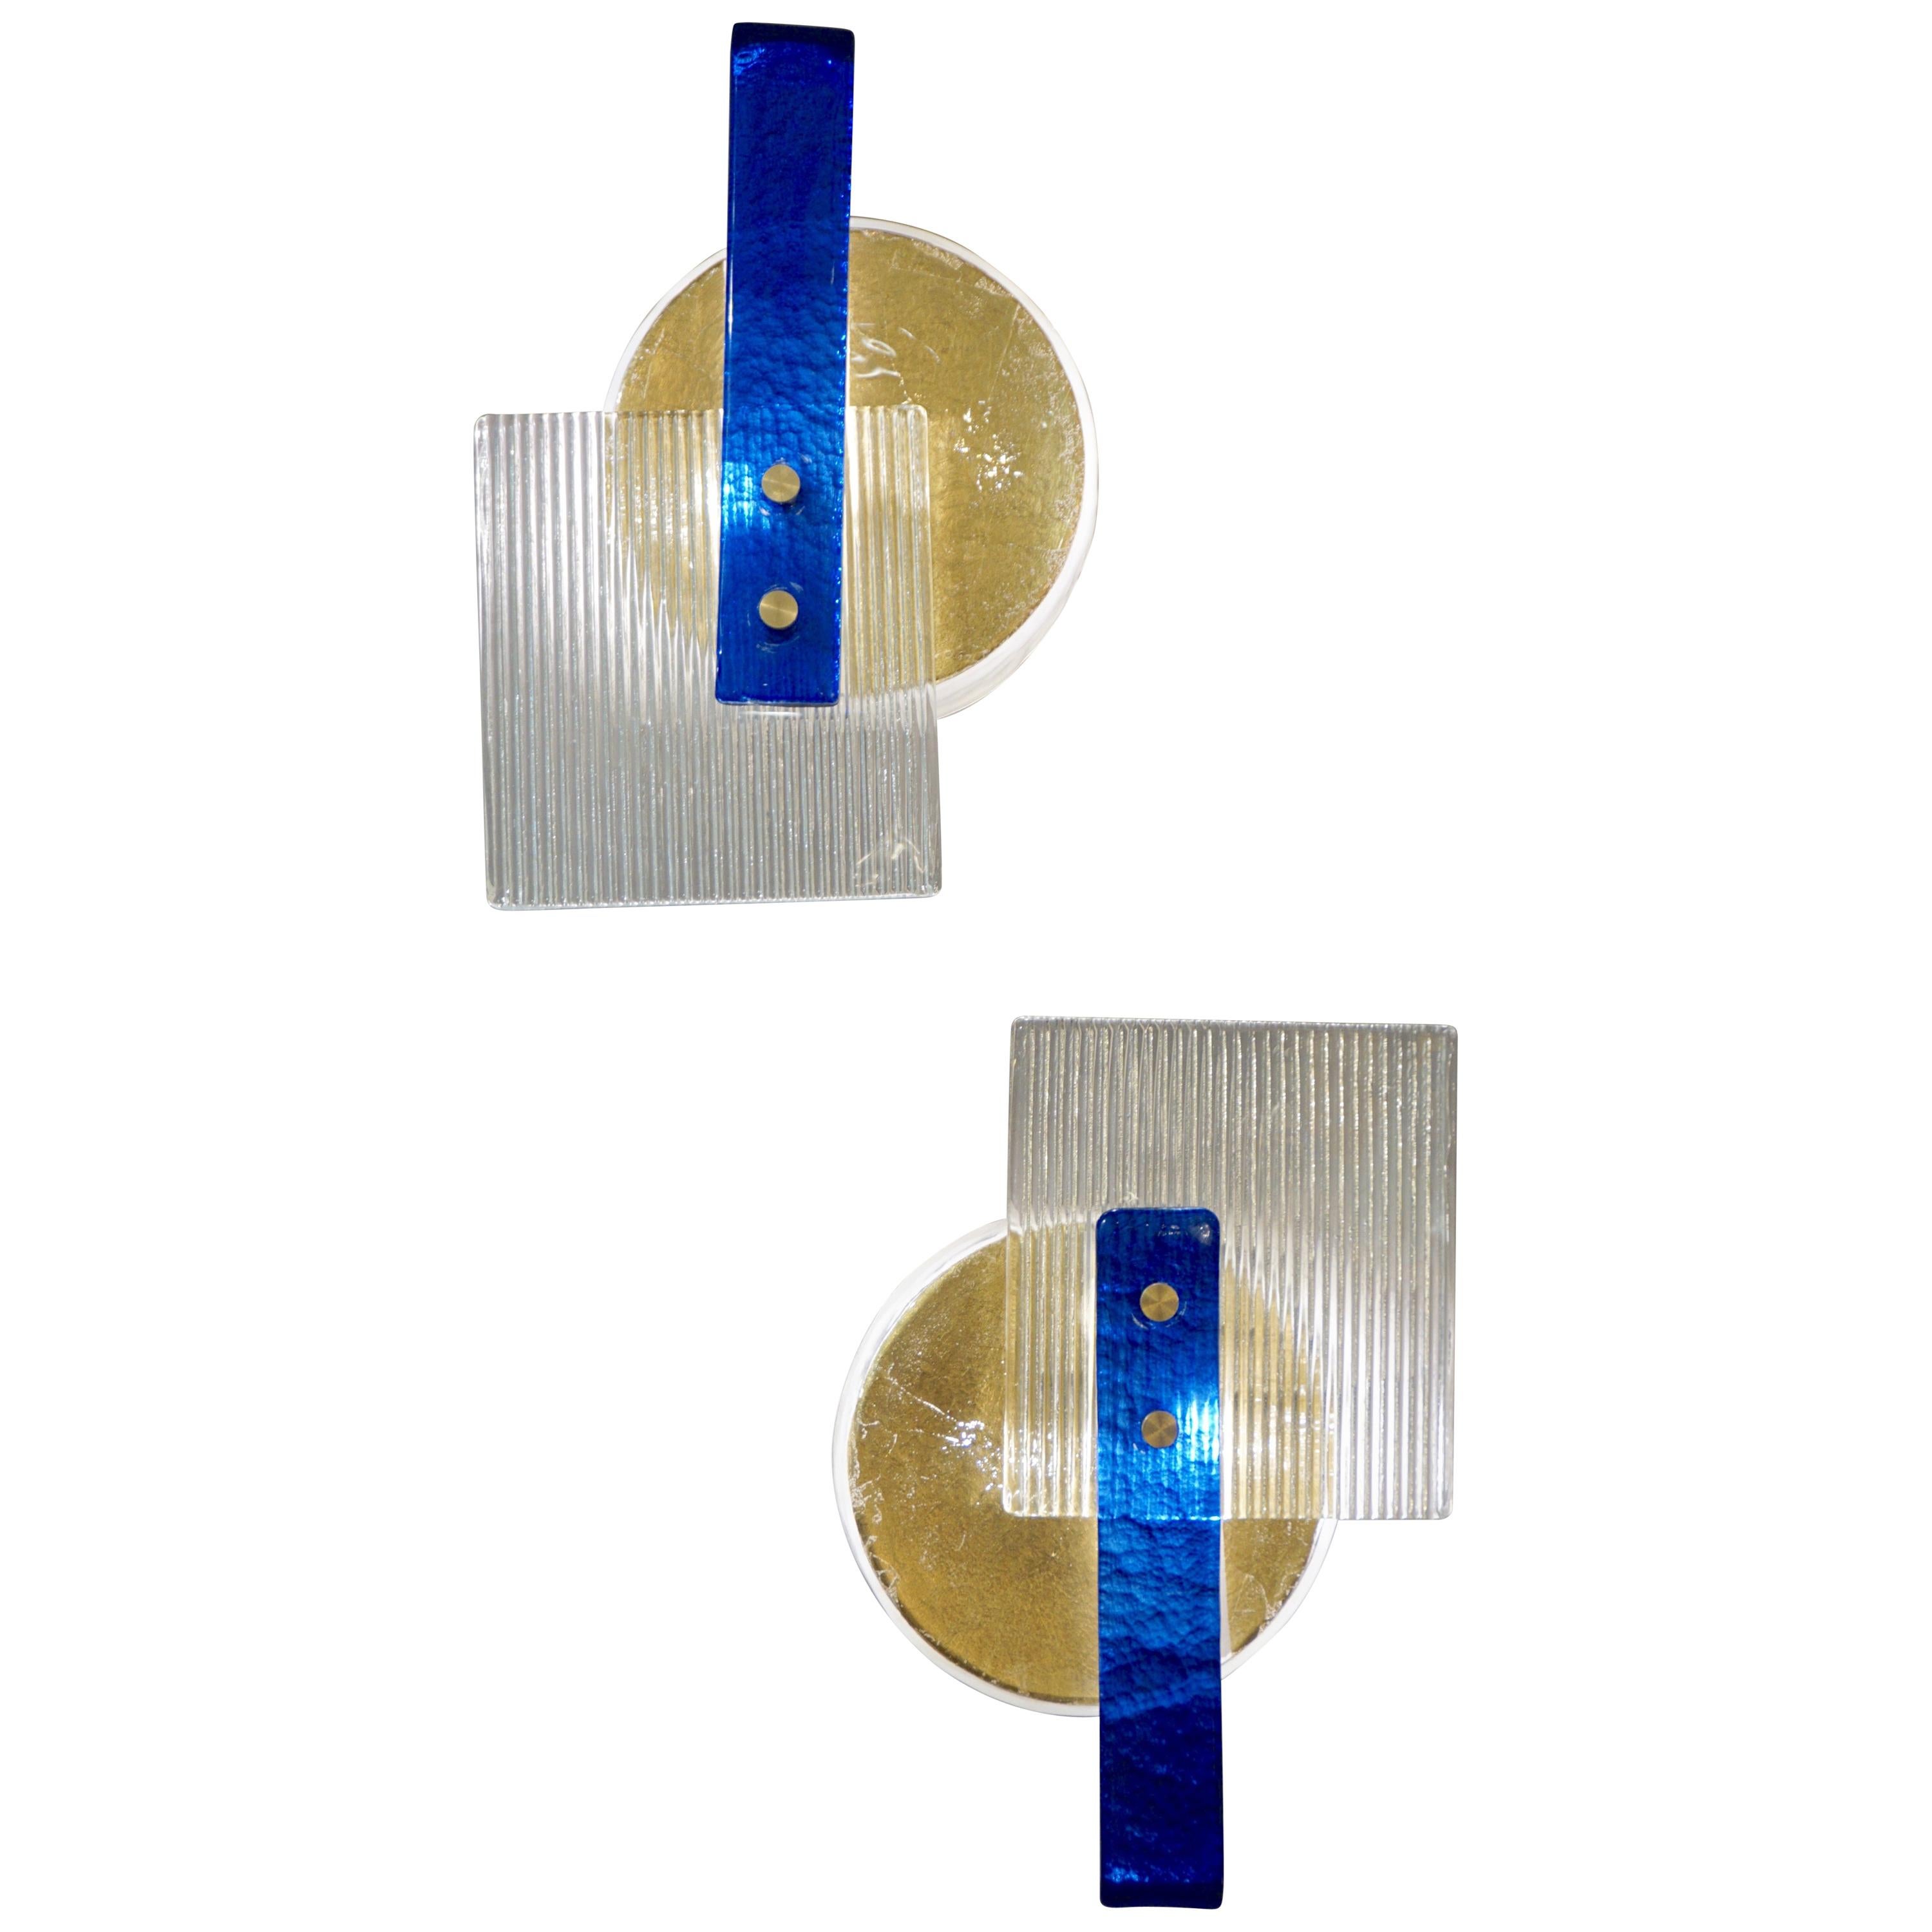 Contemporary Venetian pair of modernist geometric wall lights/ flush mounts, abstract sculpture Design, cleverly composed of three sophisticated textured Murano Art glass pieces: a royal blue marine cobalt L-shape glass element worked with silver